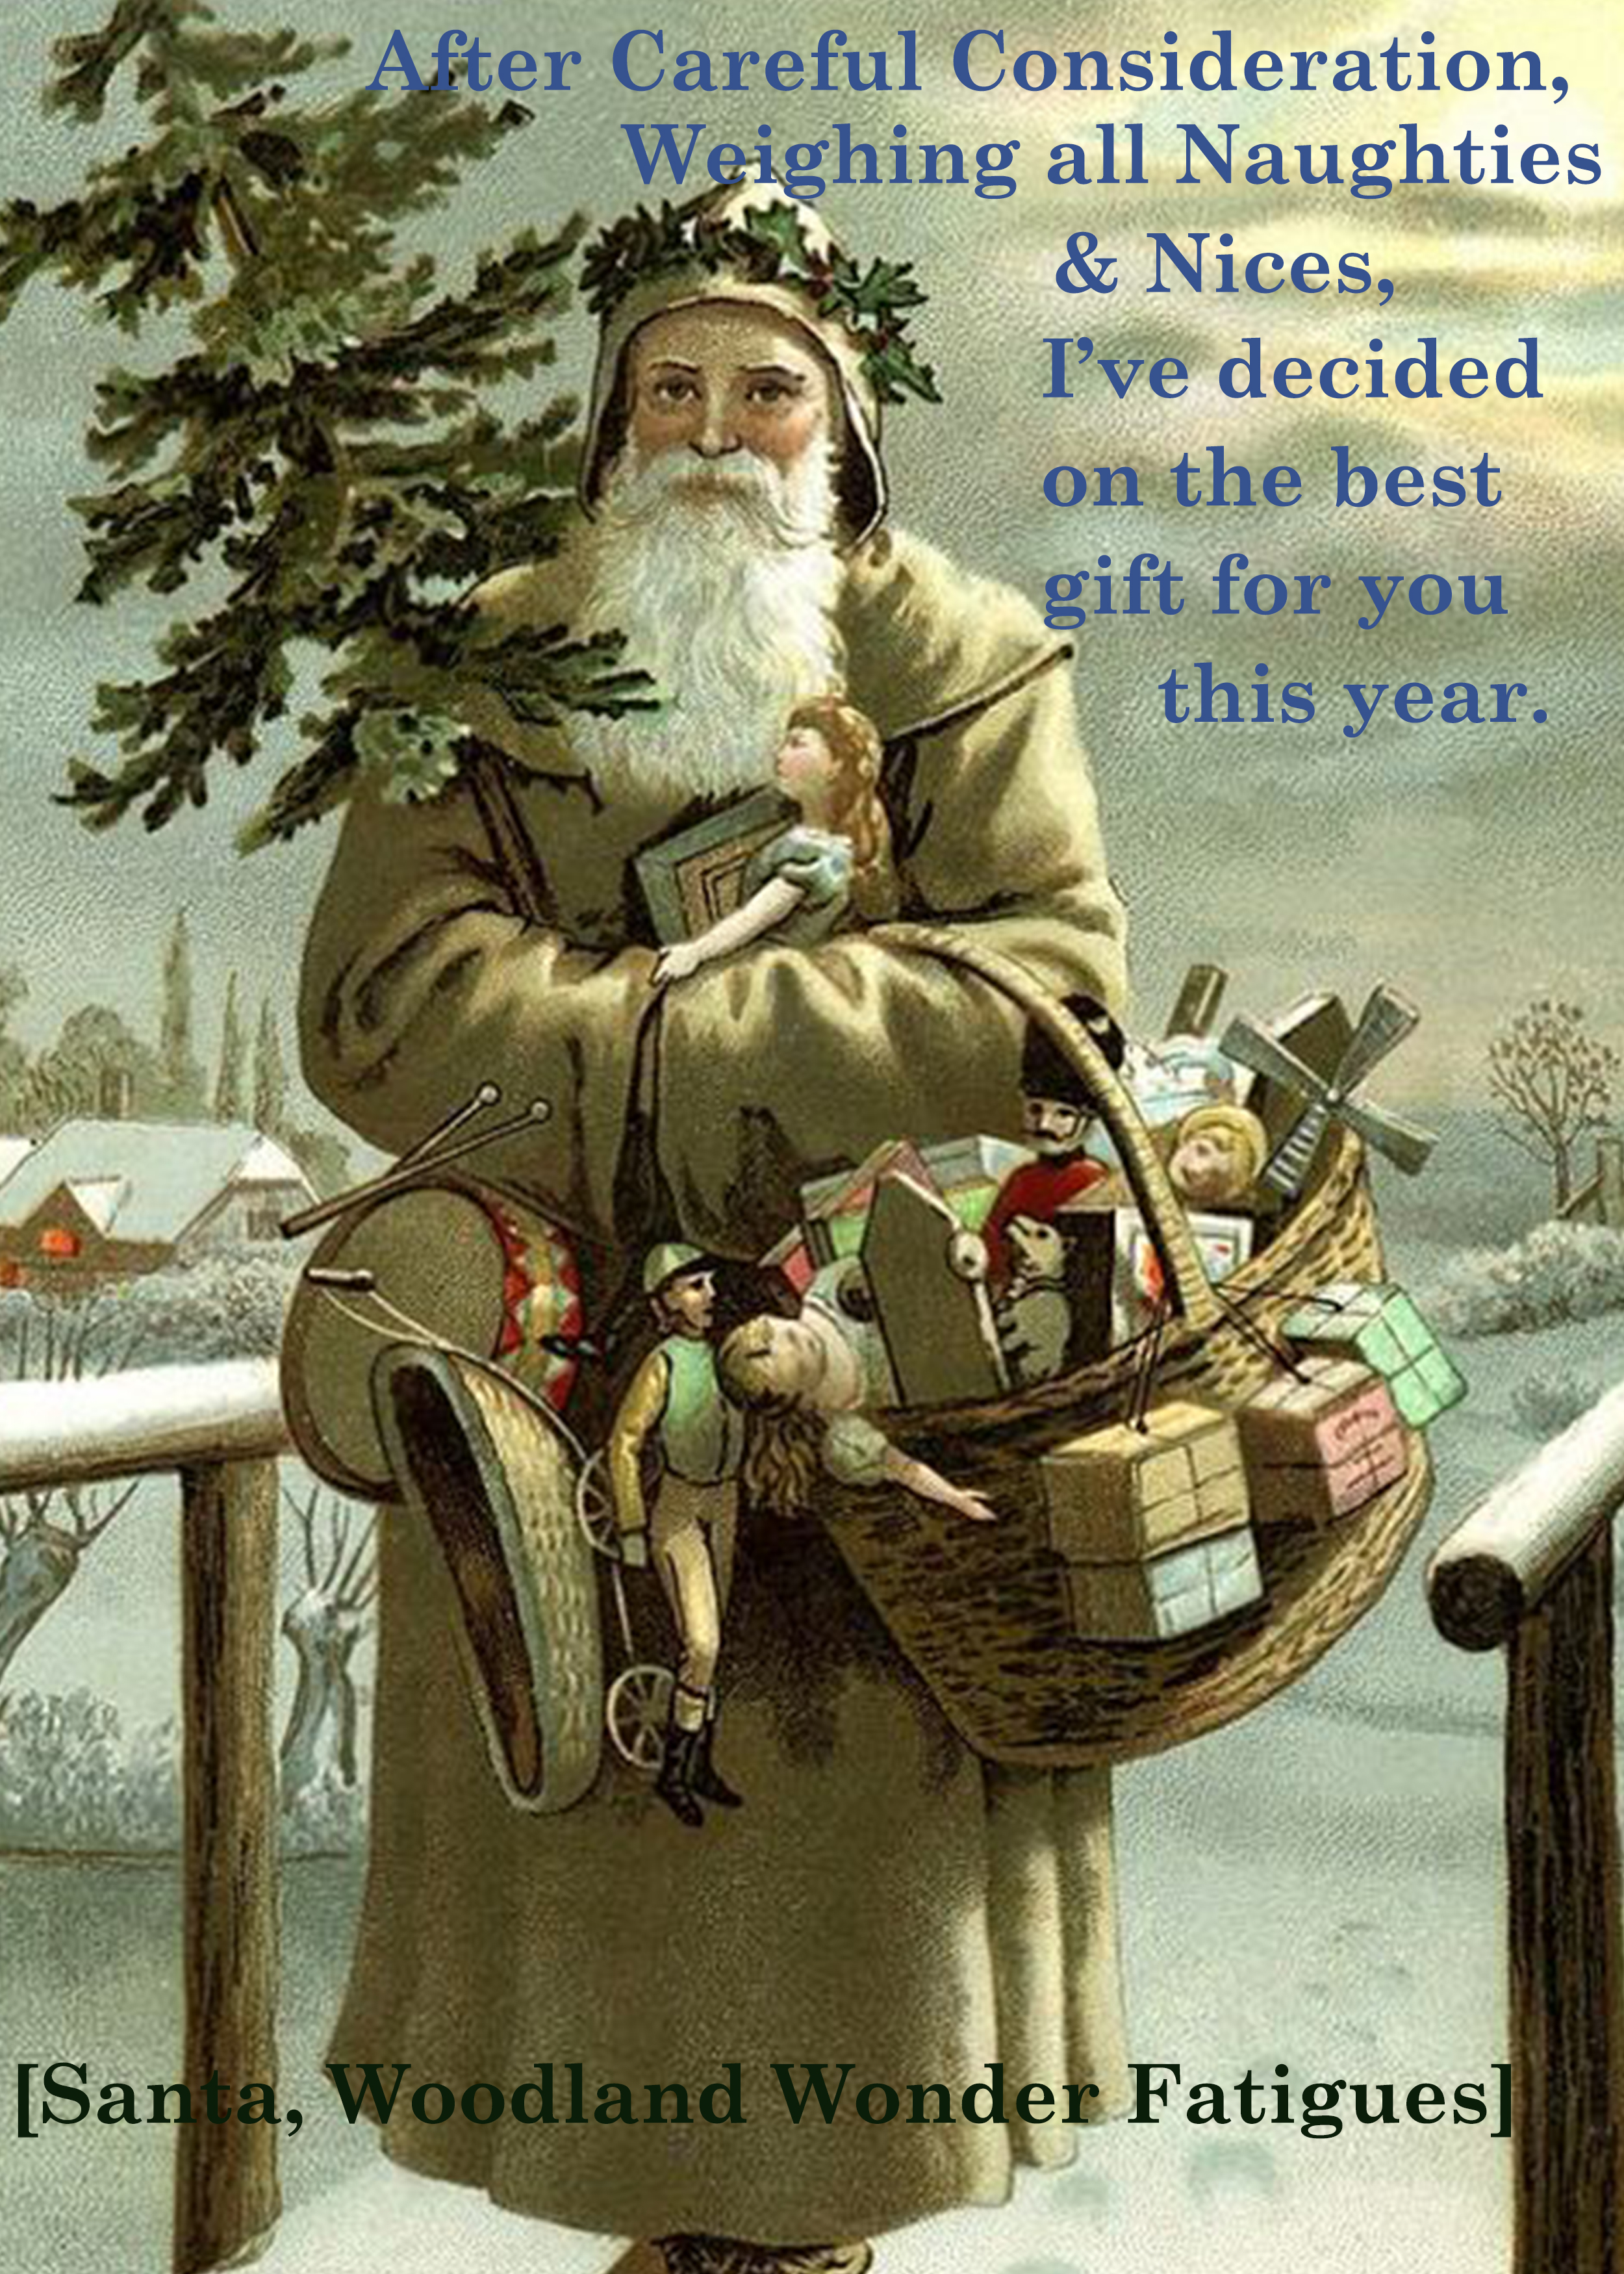 Santa looks sporty in this full length green wool coat, with gift basket, gifts, and Christmas tree, walking over a sknow-touched bridge in the gentle country parish.